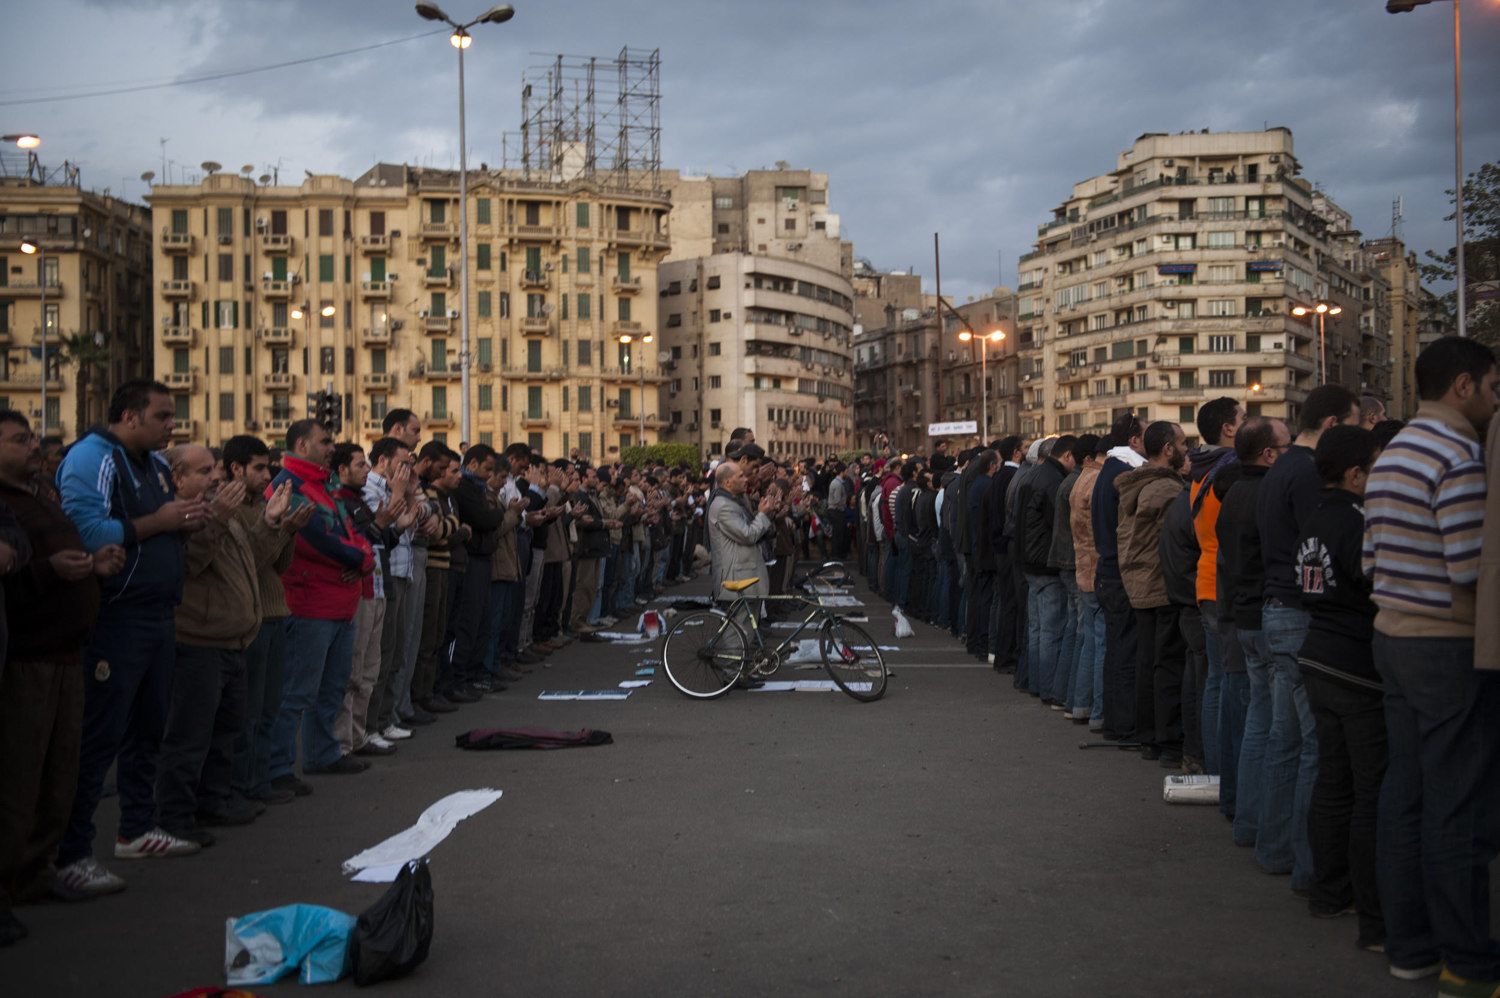  Demonstrators pray during the evening as a peaceful protest against the Mubarak regime in Tahrir Square. 